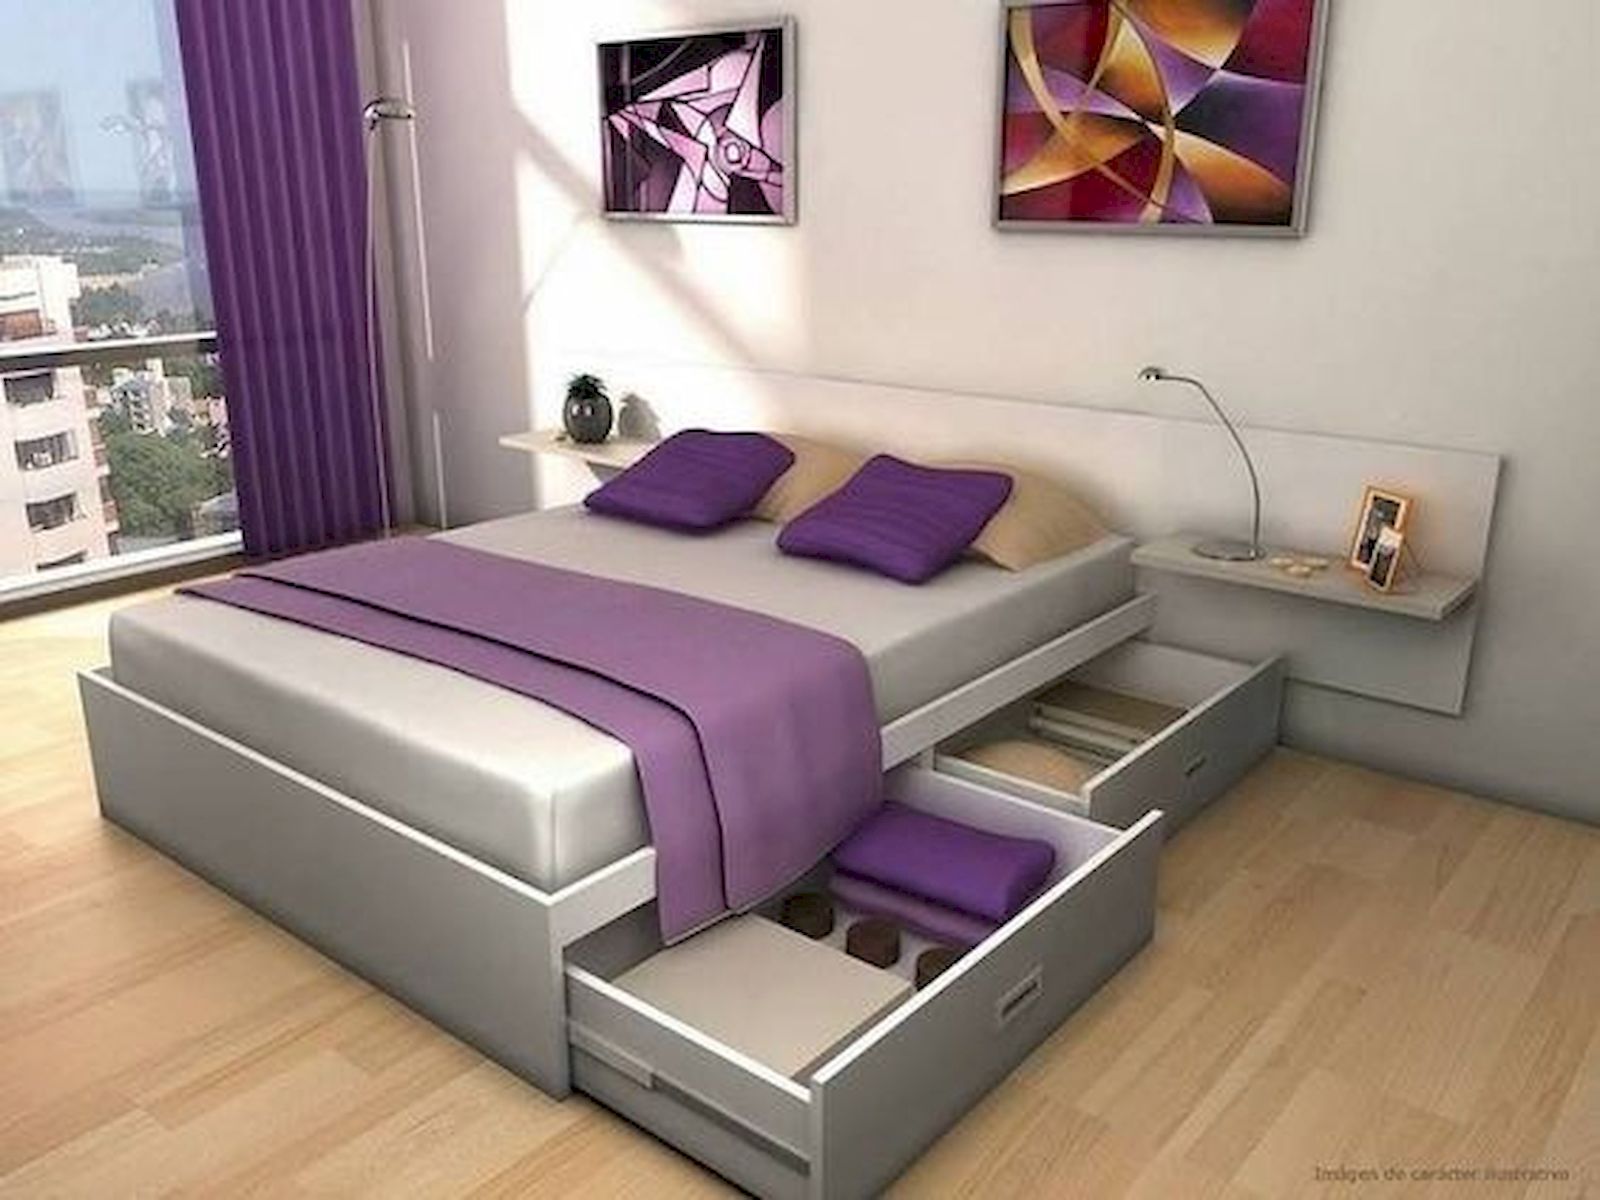 60 Brilliant Space Saving Ideas For Small Bedroom (30)